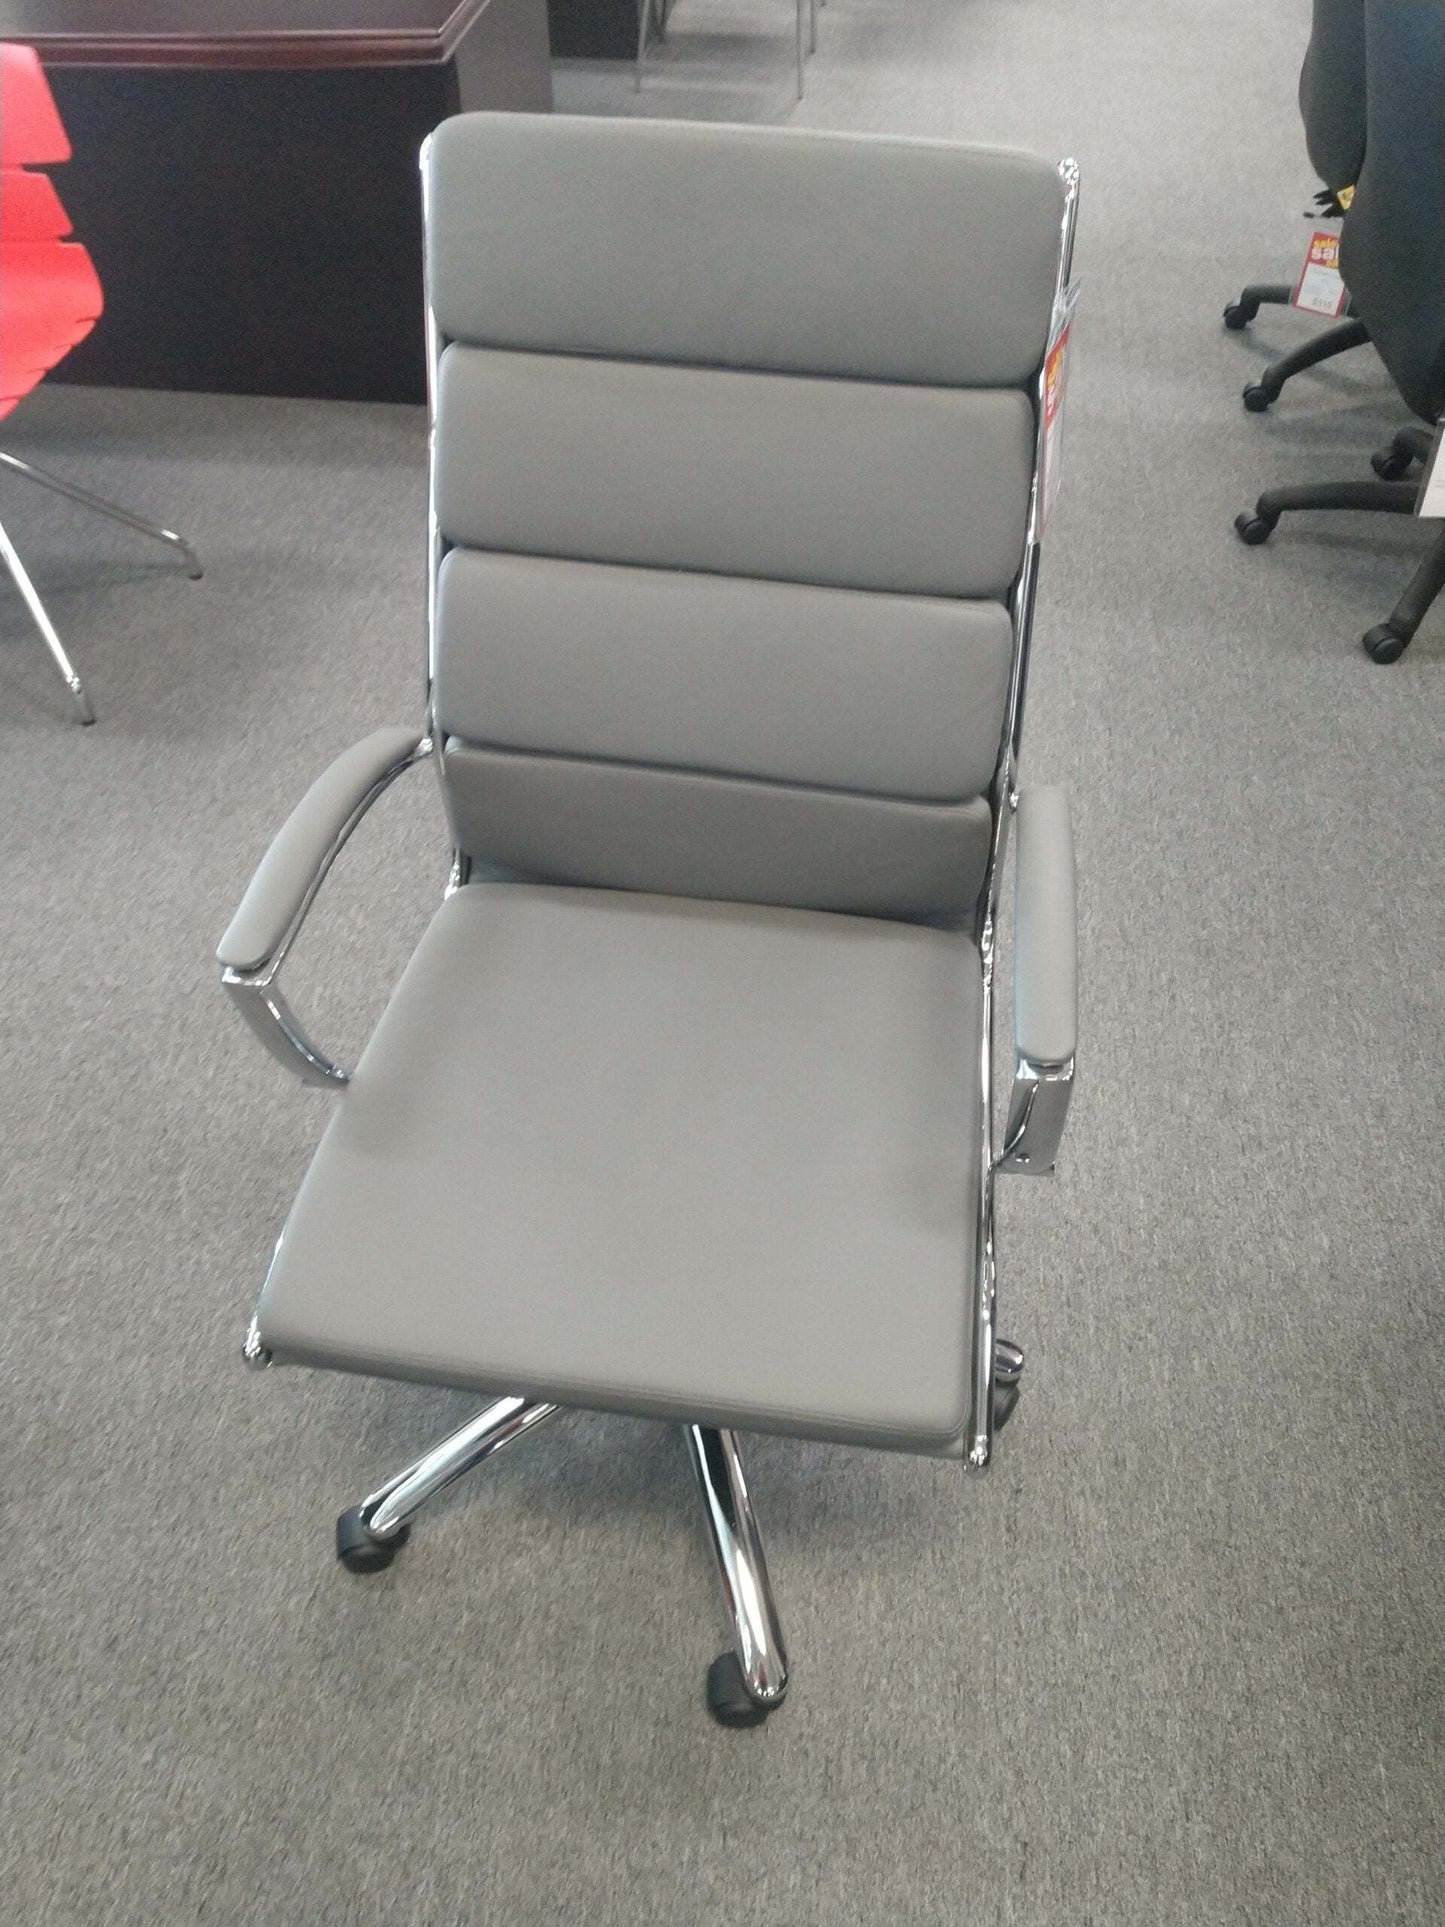 New - Alera High Back Leather Conference Chairs